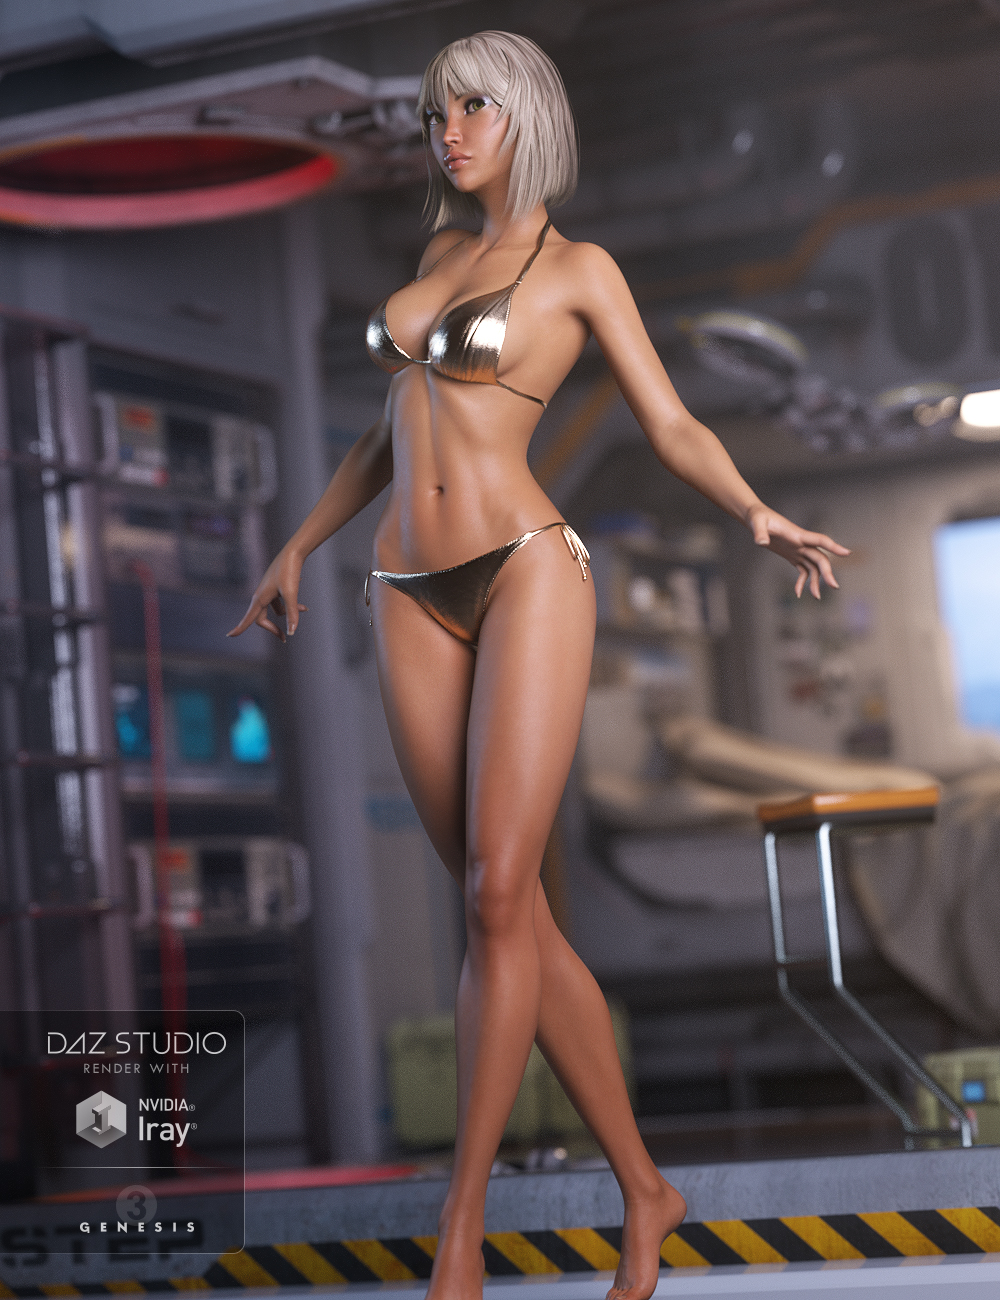 Ayumi for Aiko 7 by: 3DSublimeProductionsFred Winkler ArtSabby, 3D Models by Daz 3D